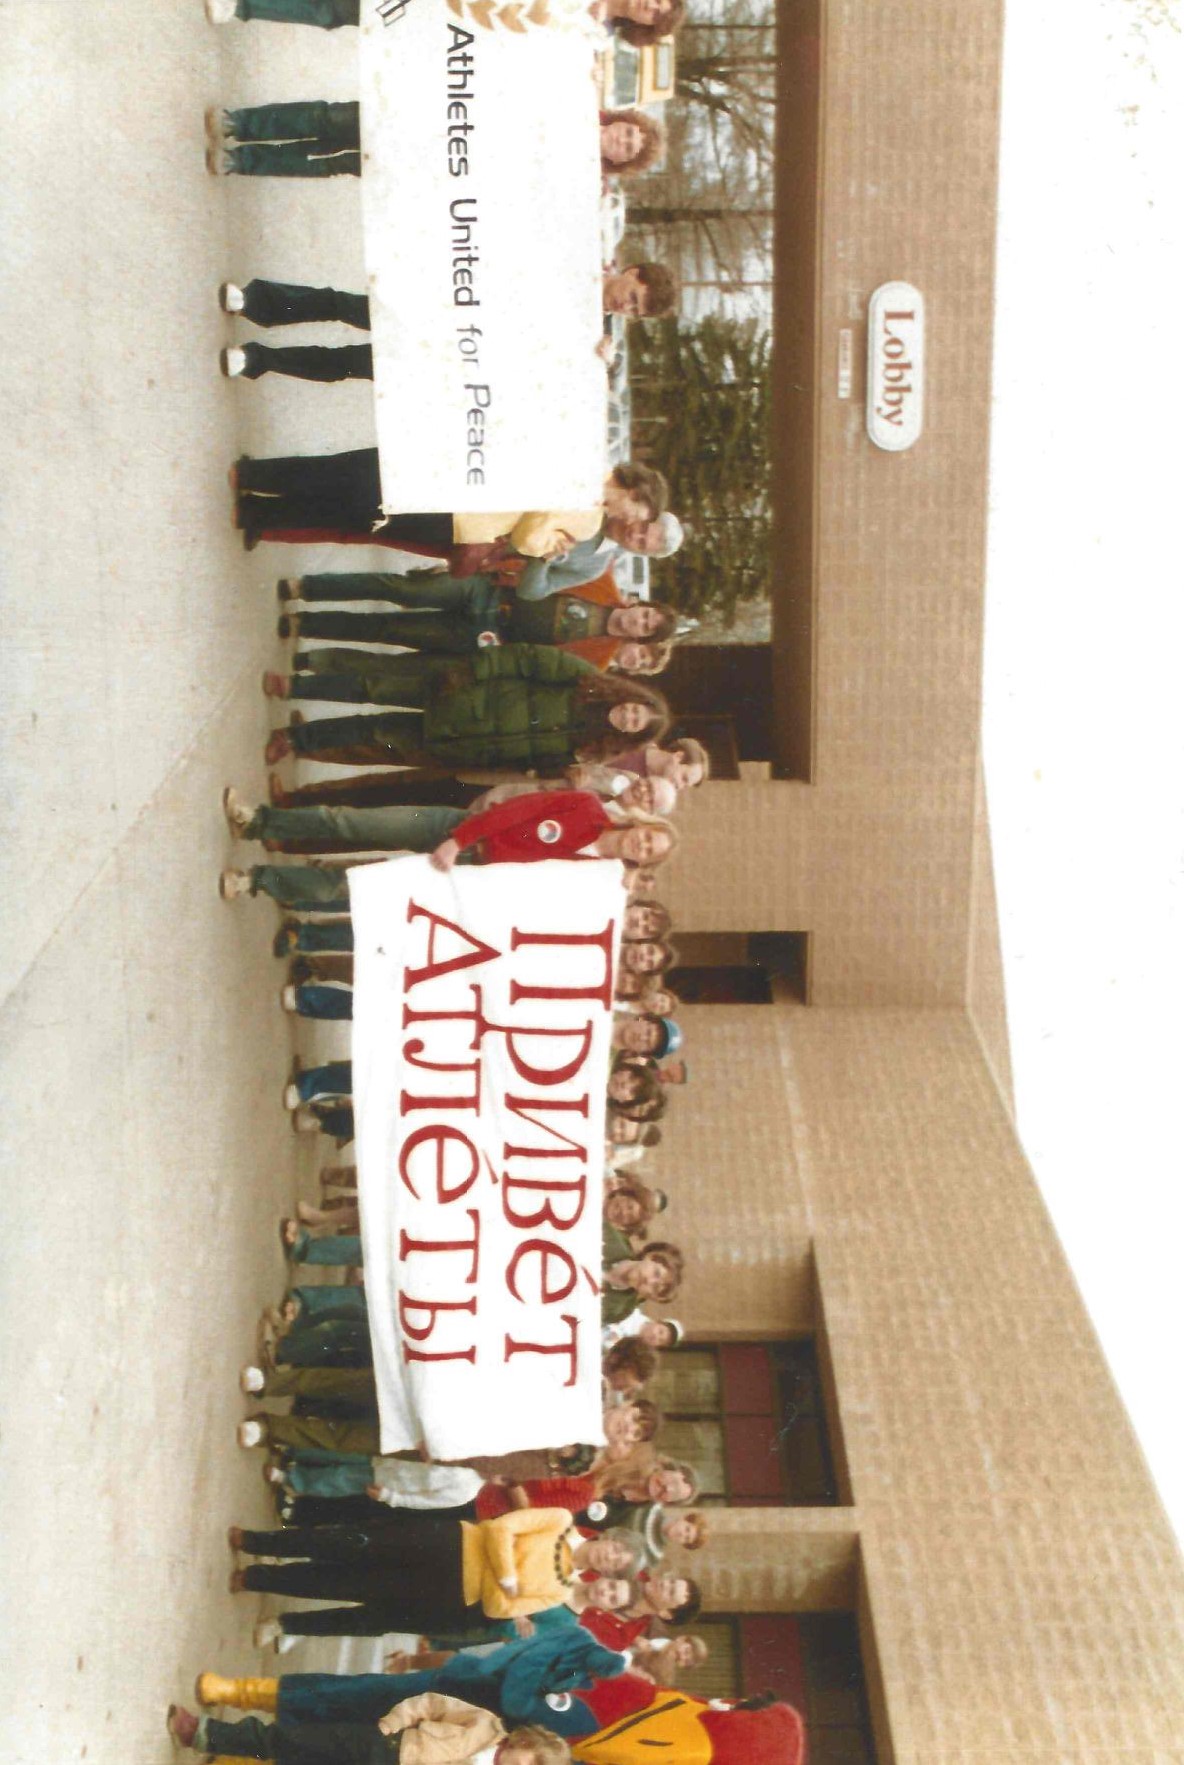 Lawrence residents greet Soviet athletes arriving to participate in the Kansas Relays, April 1983. The Russian sign reads “Hello Athletes.” Courtesy of Robert Swan Jr.